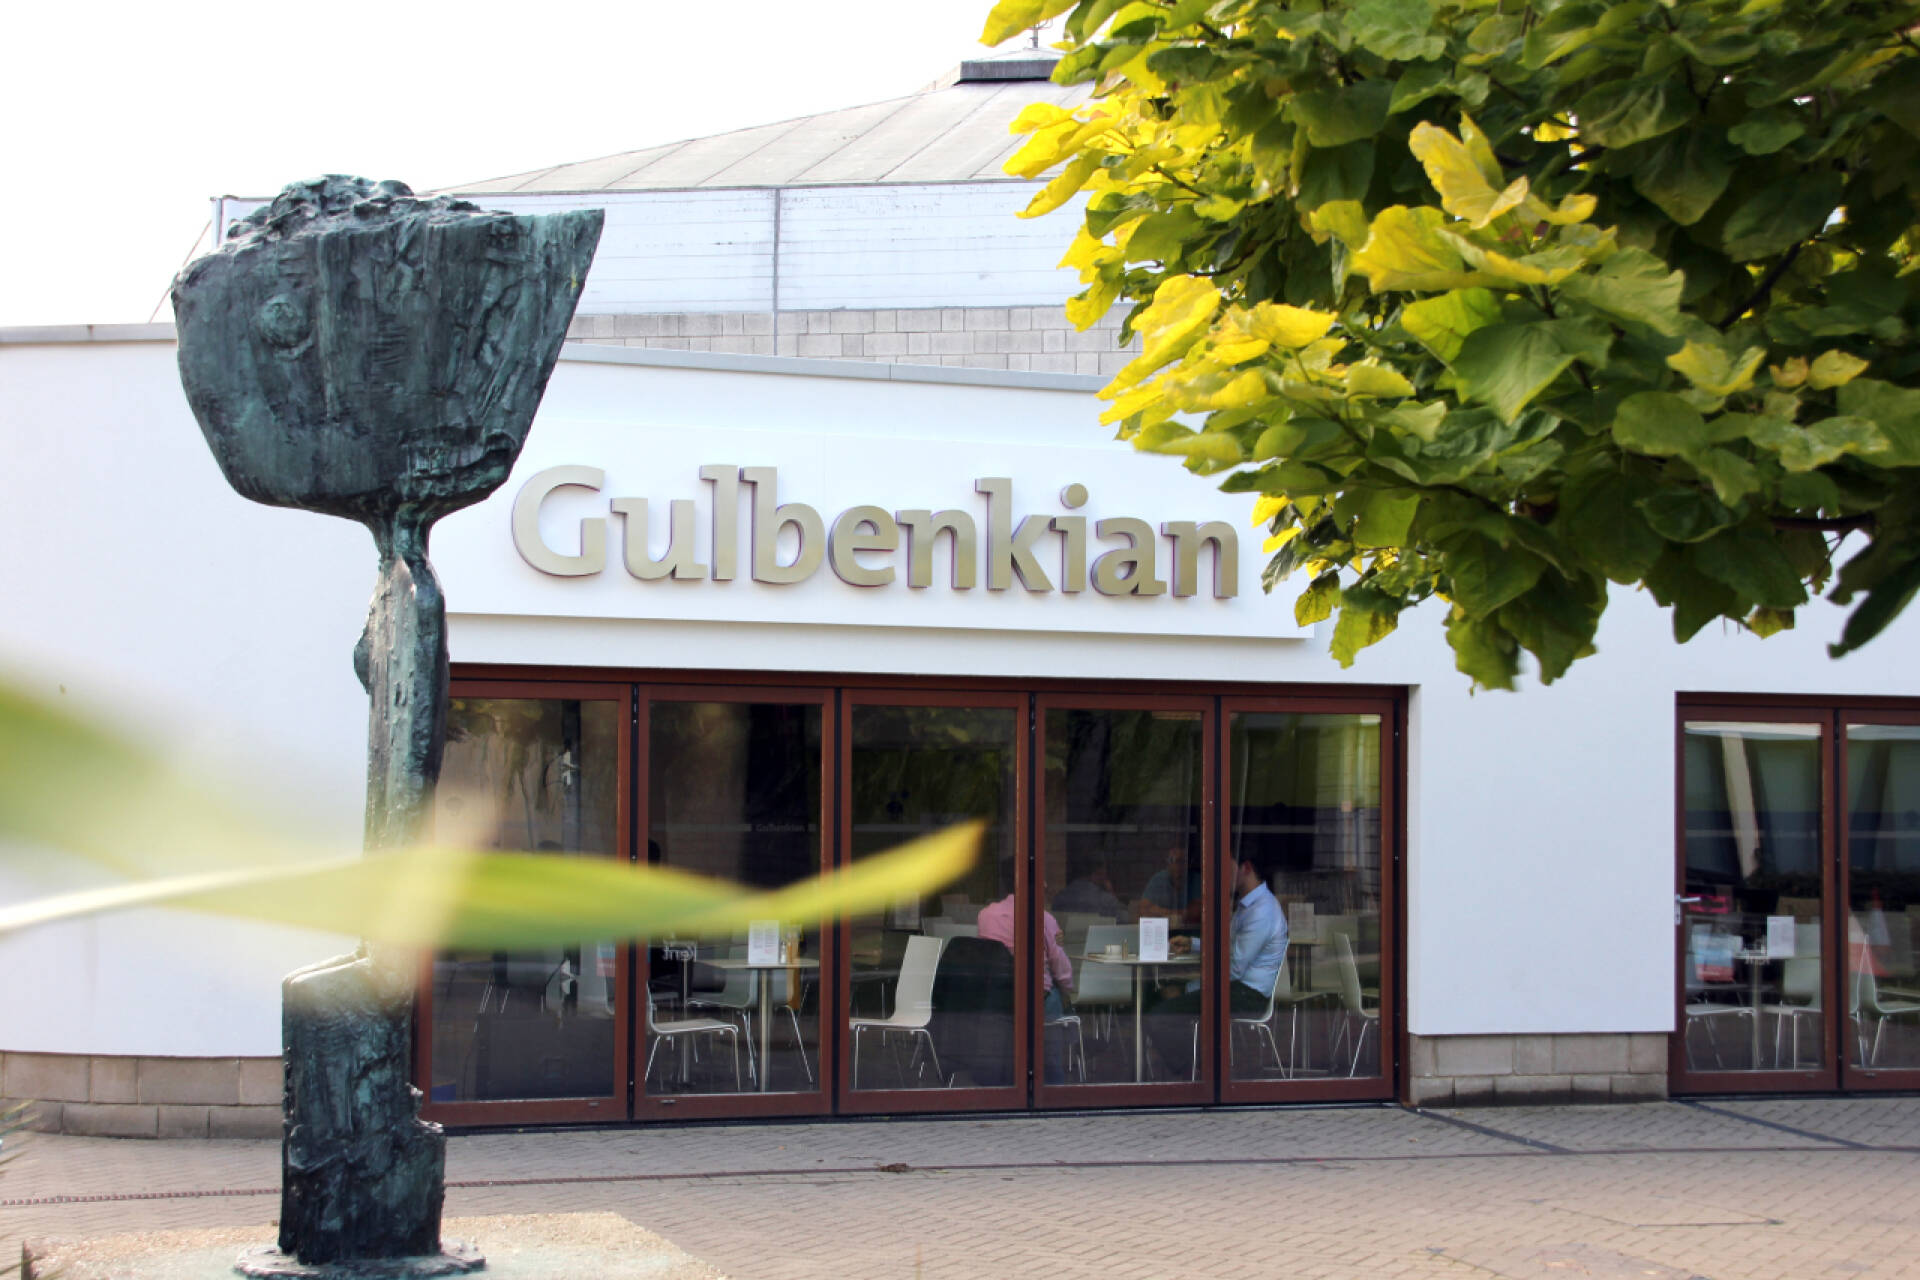 The exterior of the Gulbenkian Theatre